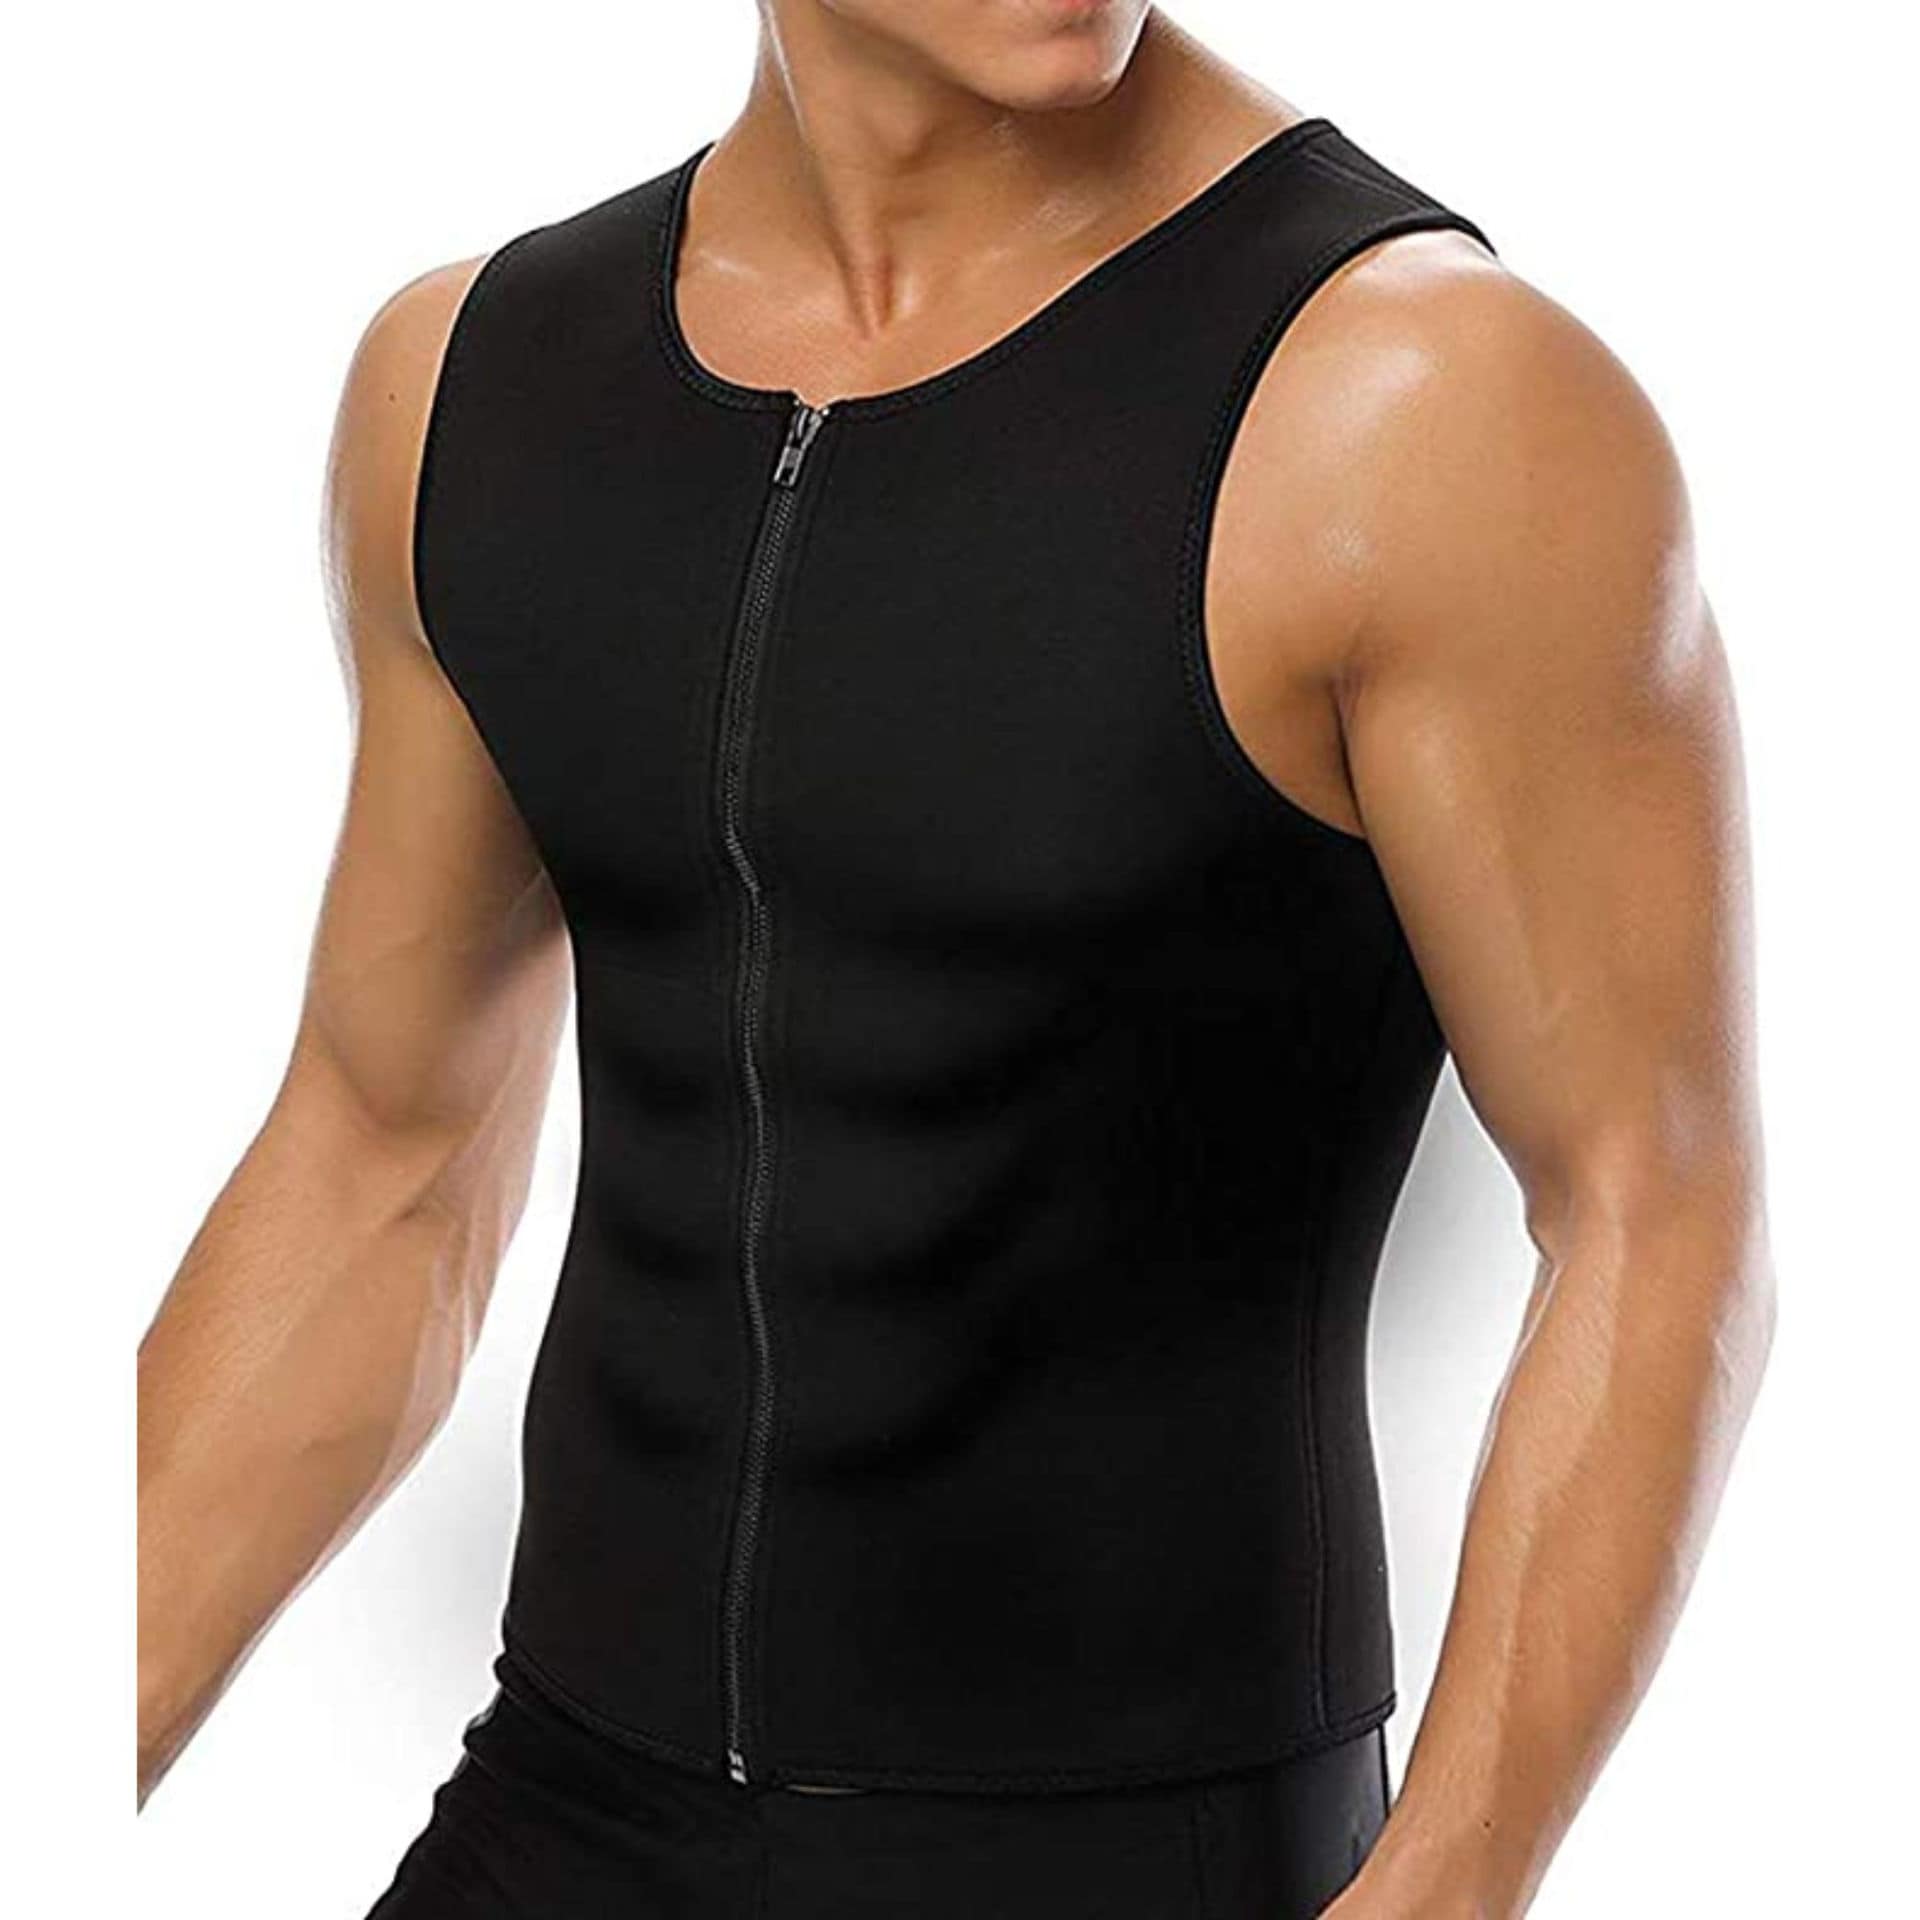 https://assets.dragonmart.ae//pictures/0422989_hot-neoprene-body-shaper-with-zipper-workout-shirt-for-mens.jpeg